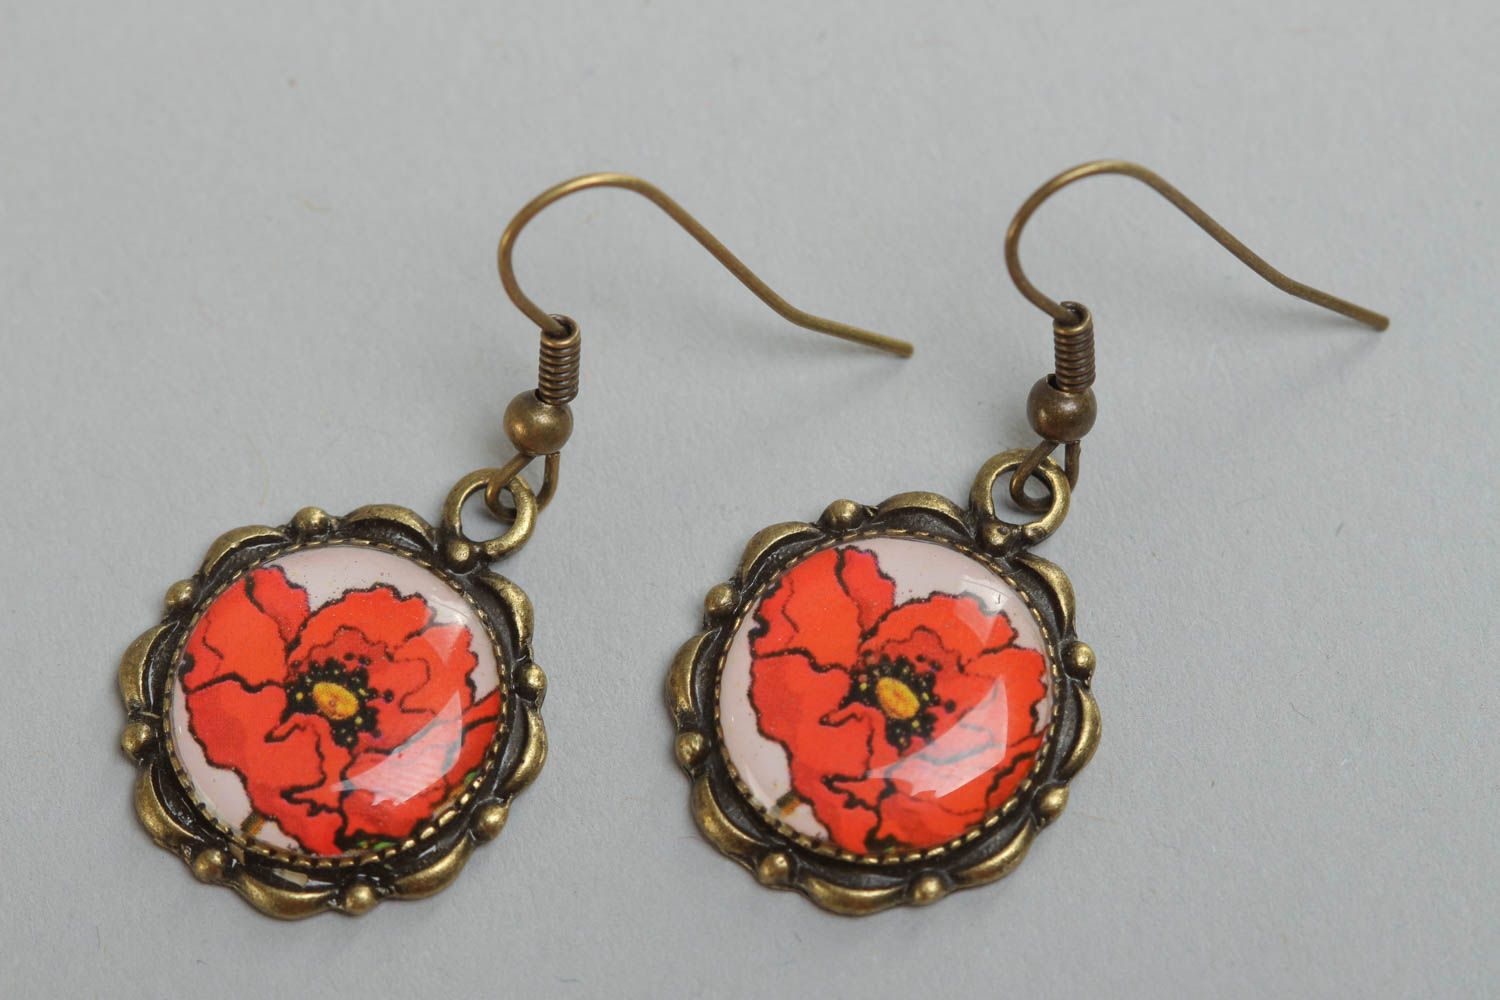 Handcrafted beautiful vintage earrings made of glass glaze with red poppies photo 2